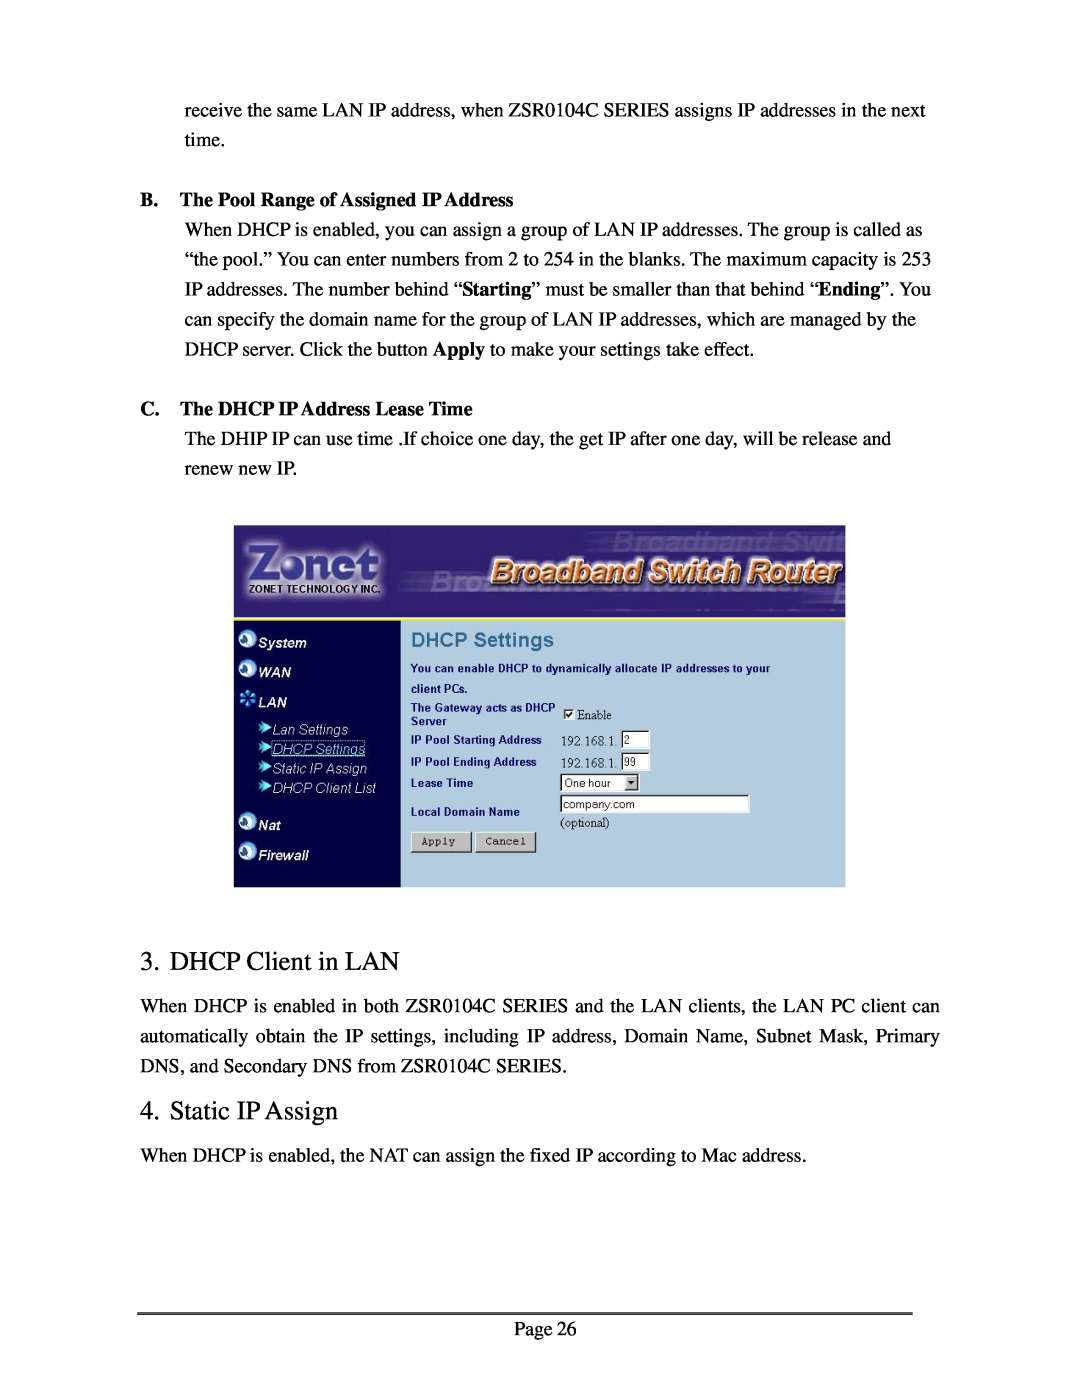 Zonet Technology ZSR0104C Series user manual DHCP Client in LAN, Static IP Assign, B. The Pool Range of Assigned IP Address 